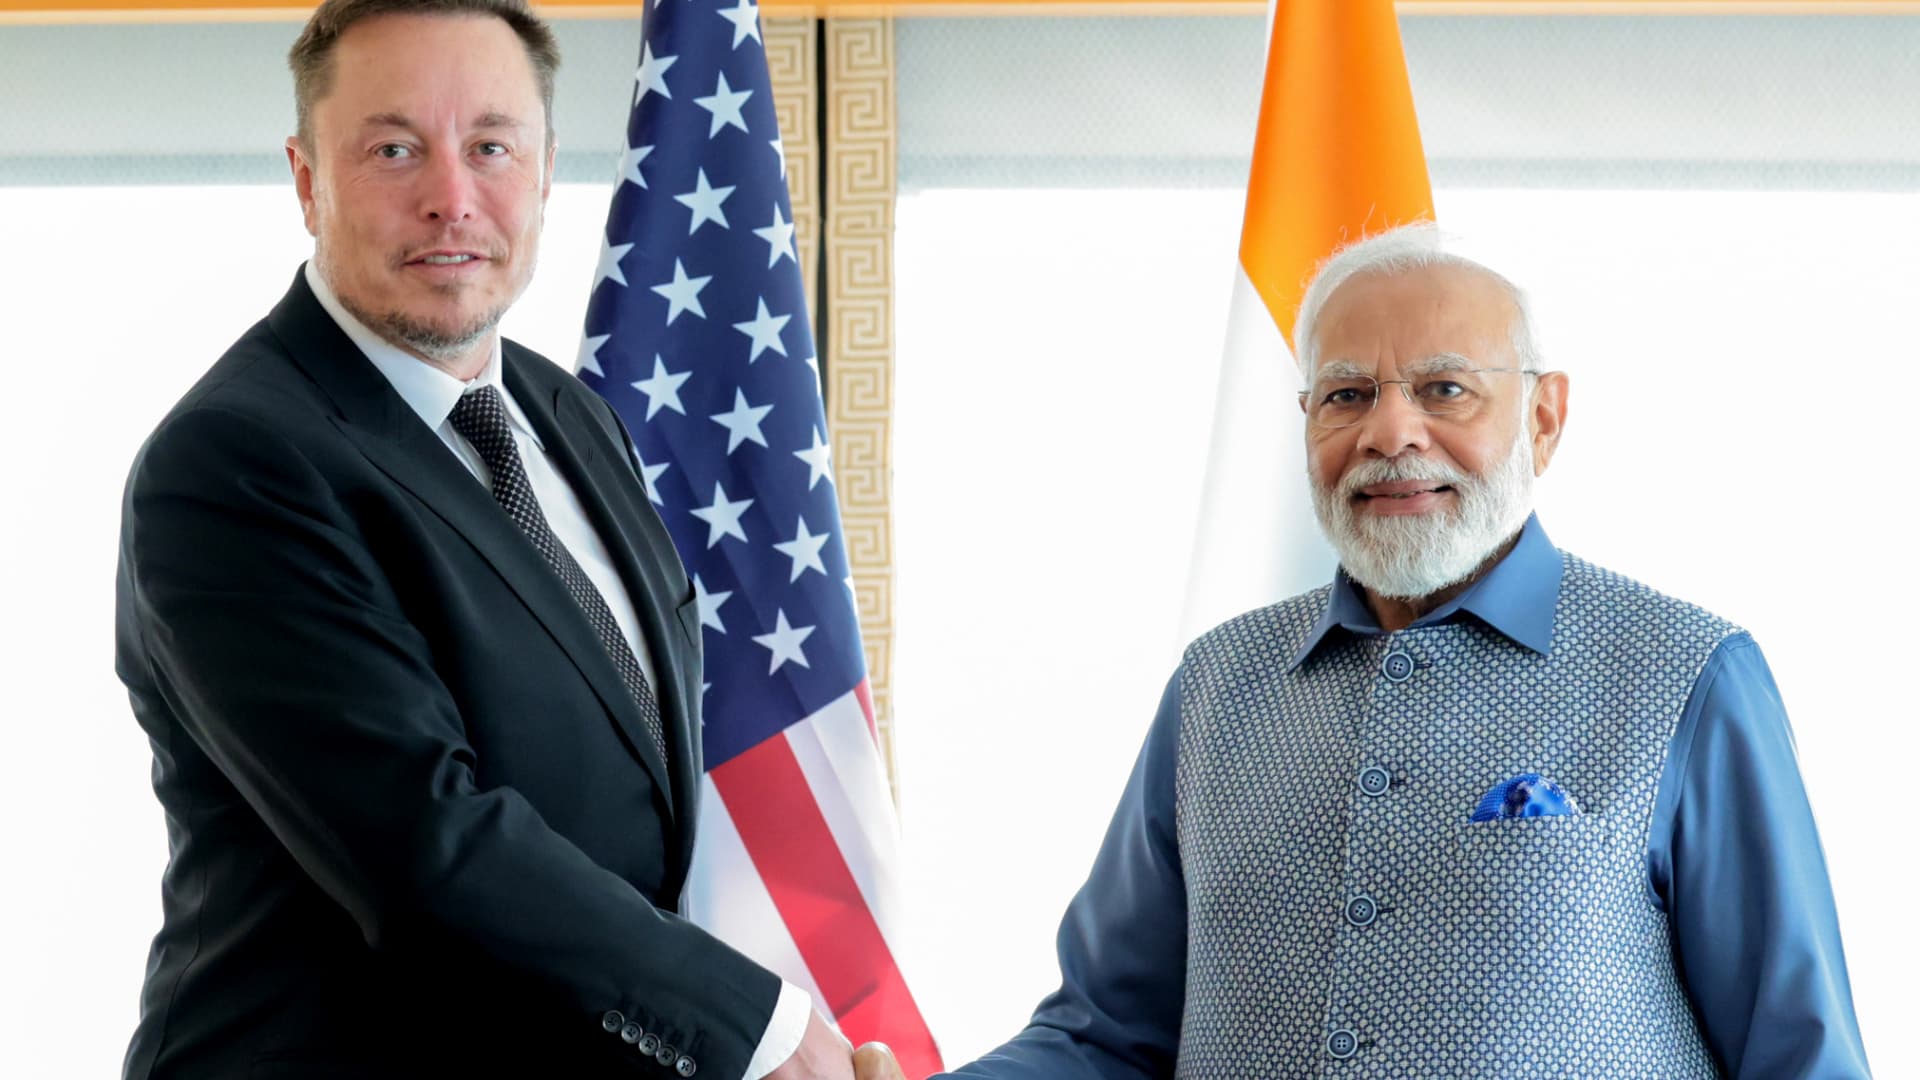 Indian Prime Minister Narendra Modi (R) meets with Elon Musk (L) in New York, United States on June 20, 2023. (Photo by Indian Press Information Bureau (PIB) / Handout/Anadolu Agency via Getty Images)